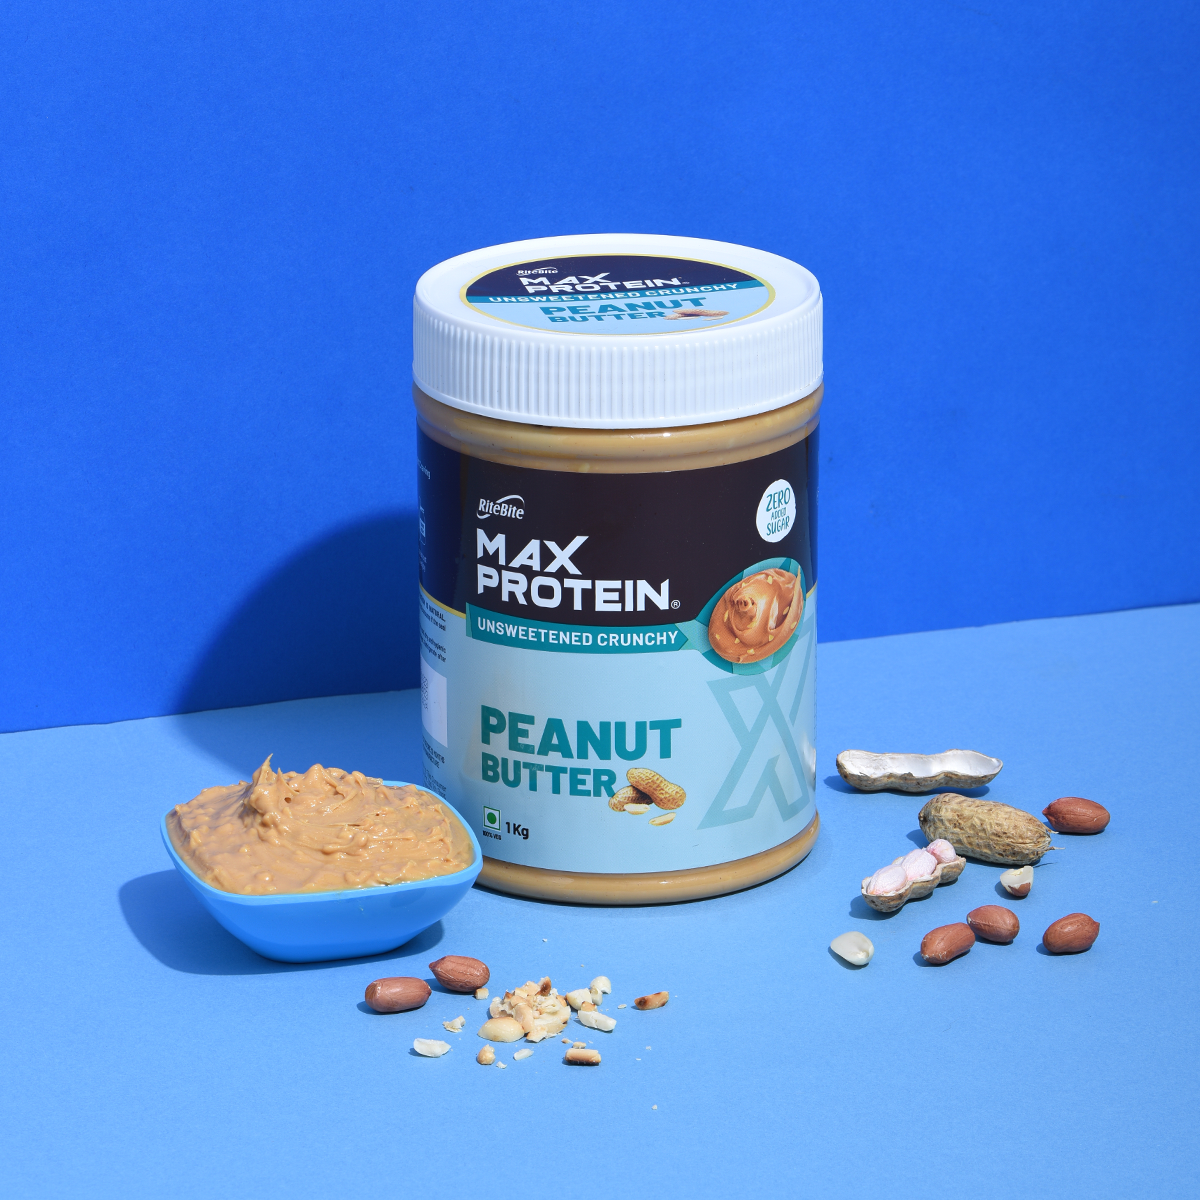 Max Protein Peanut Butter Unsweetened Crunchy - 1kg